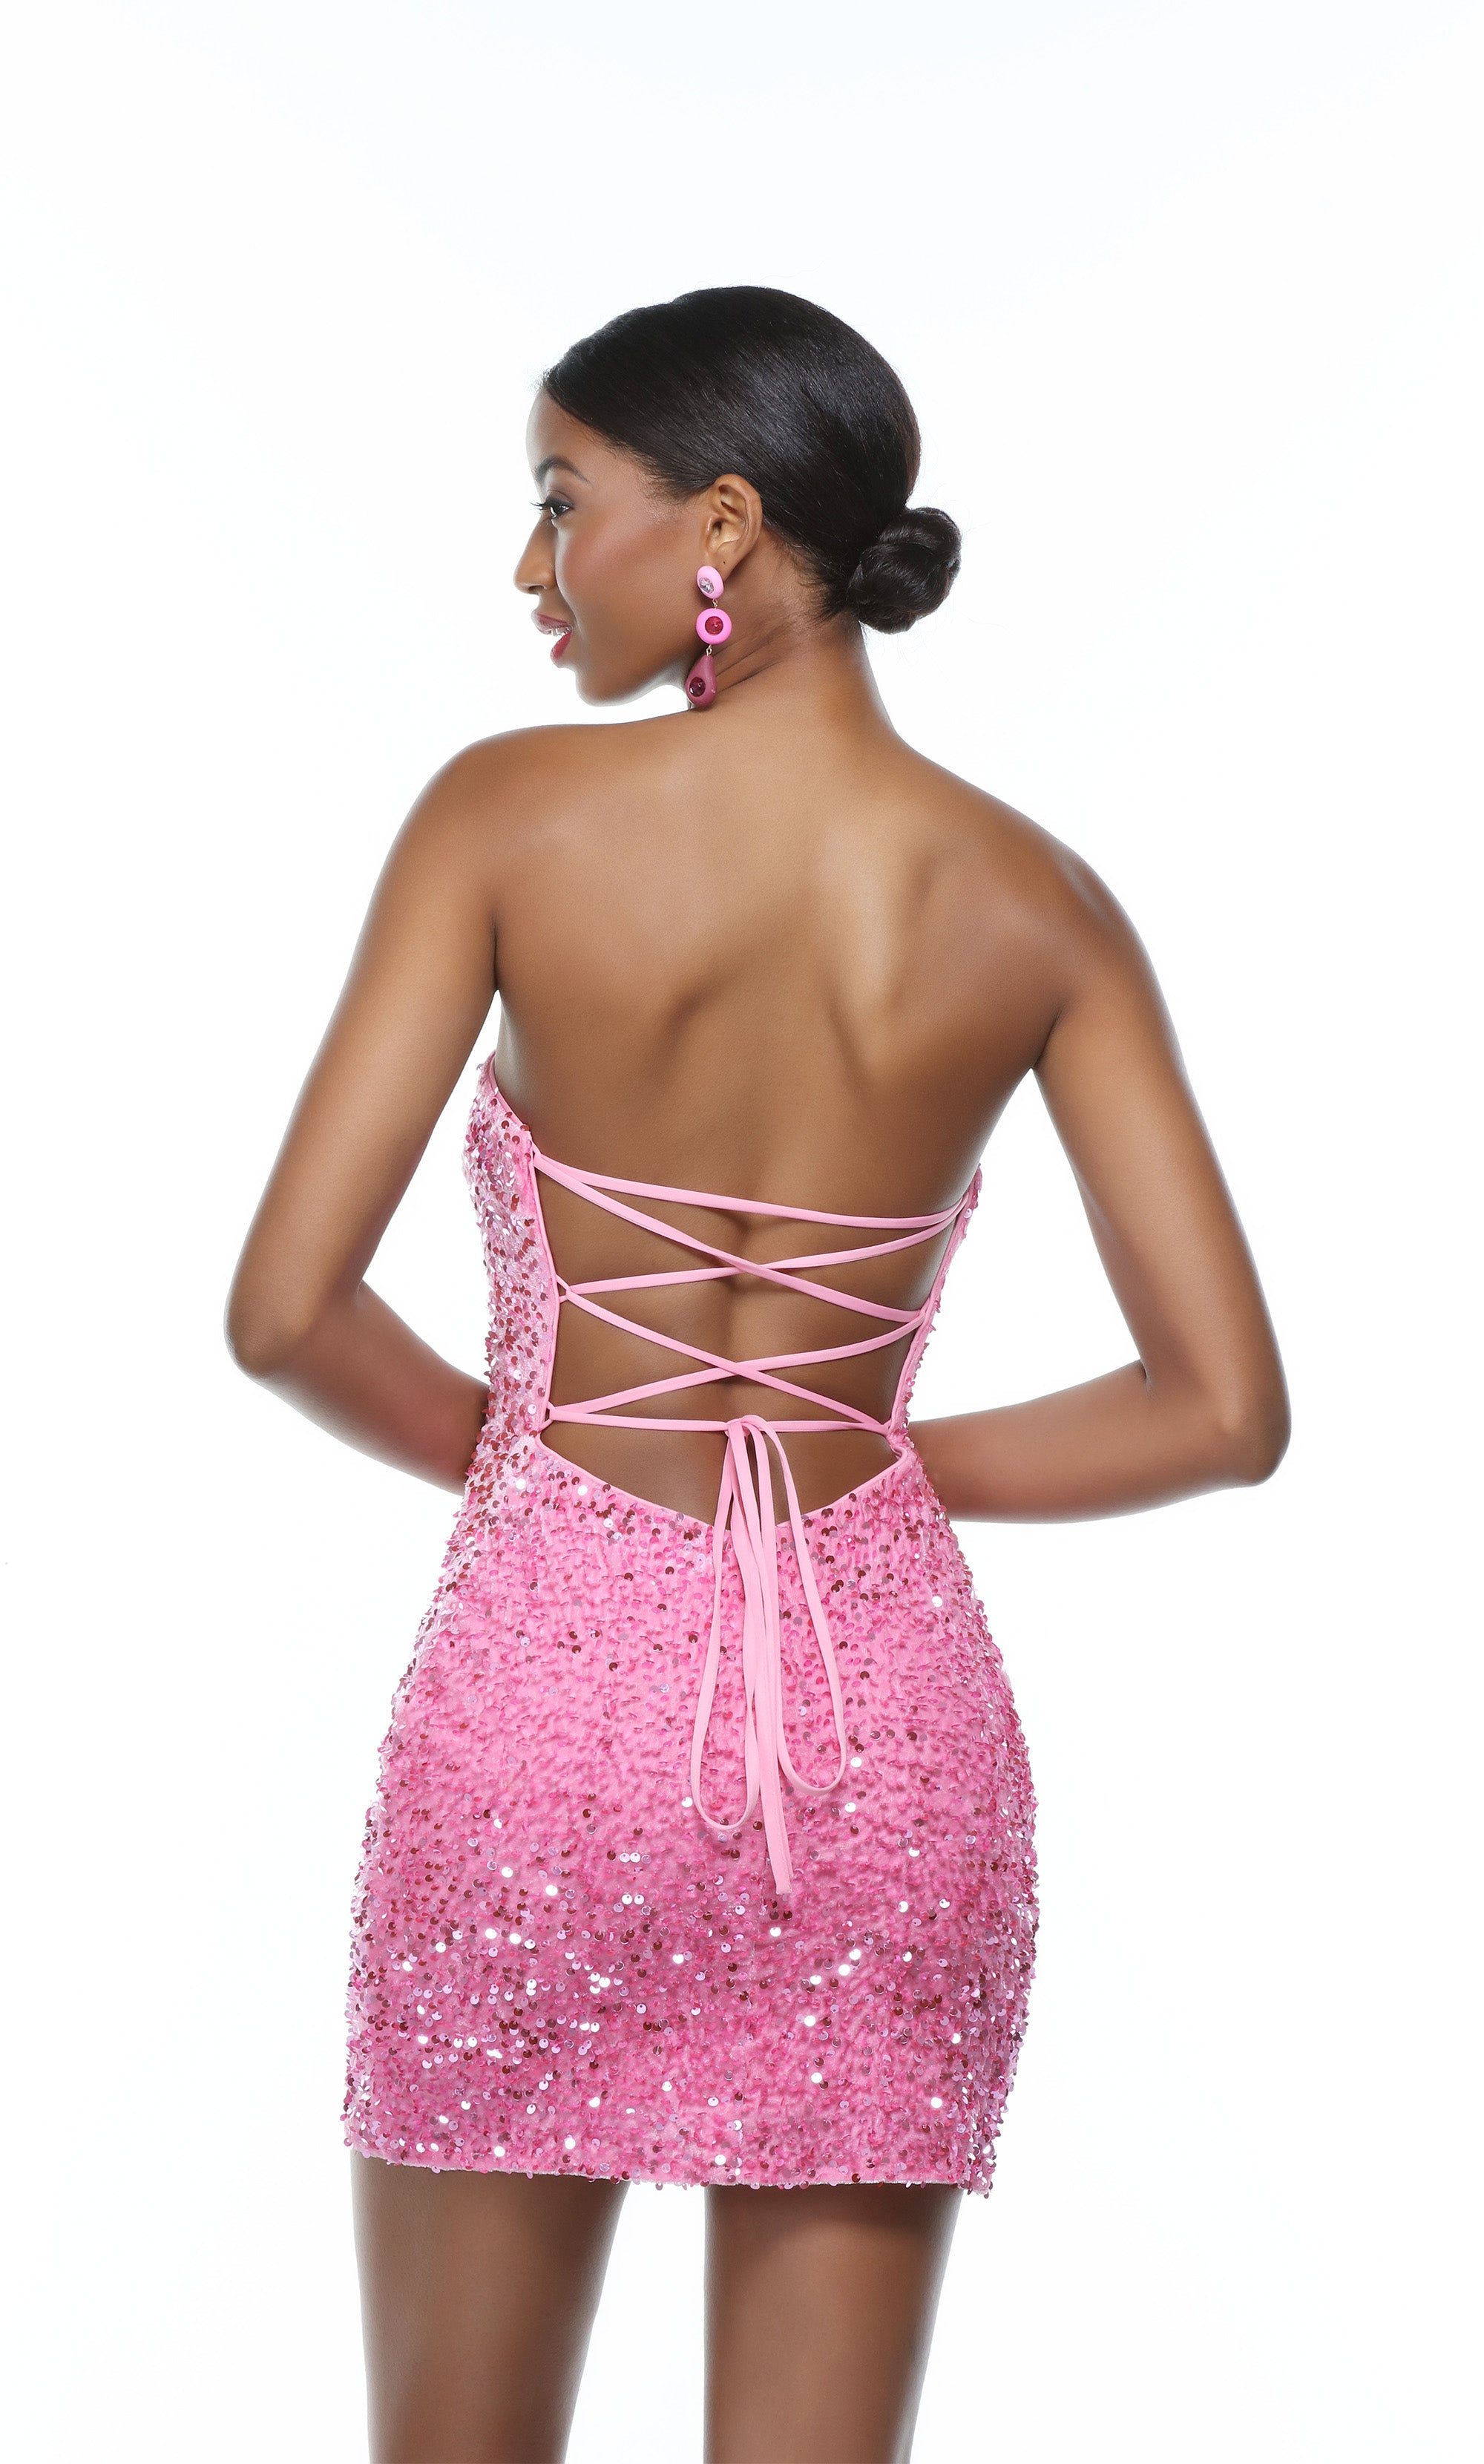 Formal Dress: 4605. Short, Strapless, Straight, Lace-up Back